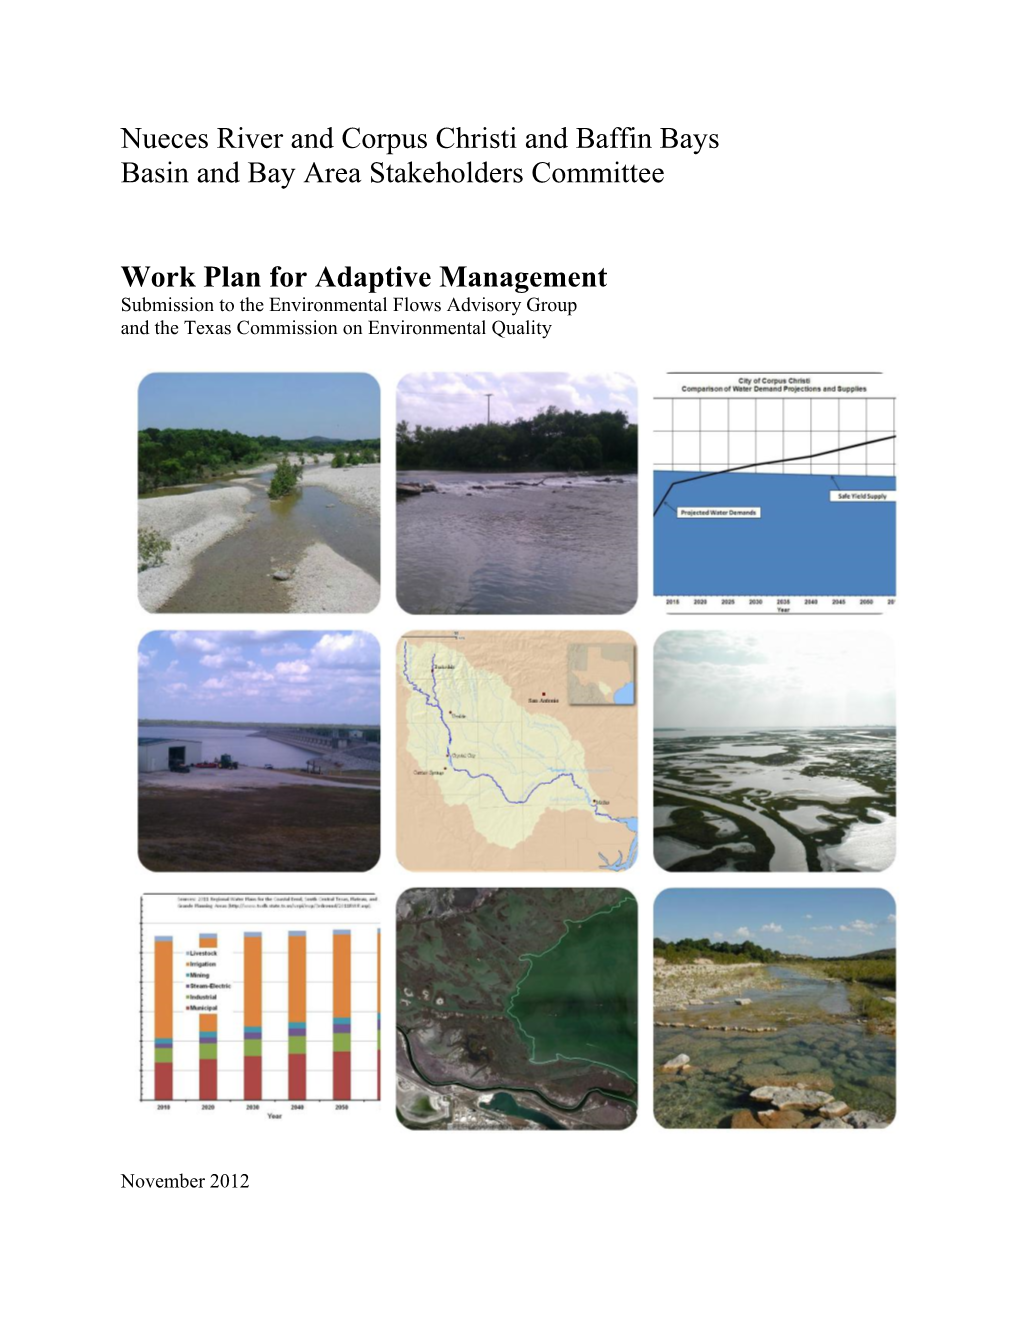 Nueces River and Corpus Christi and Baffin Bays Basin and Bay Area Stakeholders Committee Work Plan for Adaptive Management